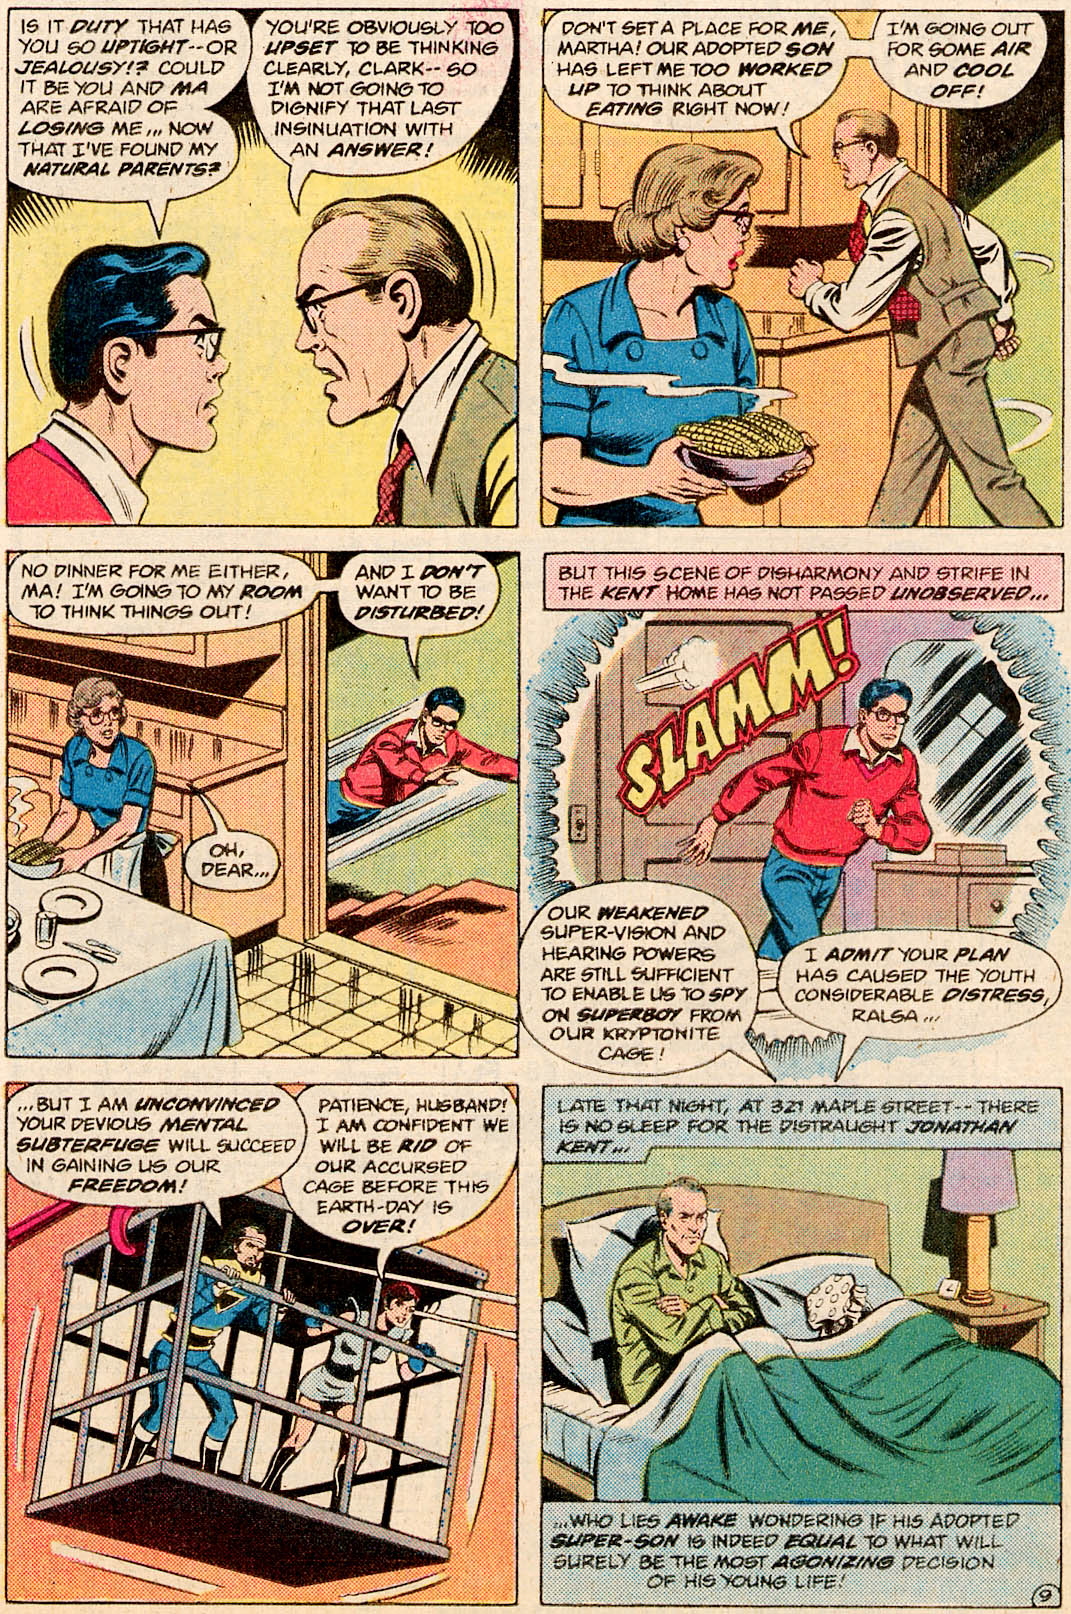 The New Adventures of Superboy 28 Page 9